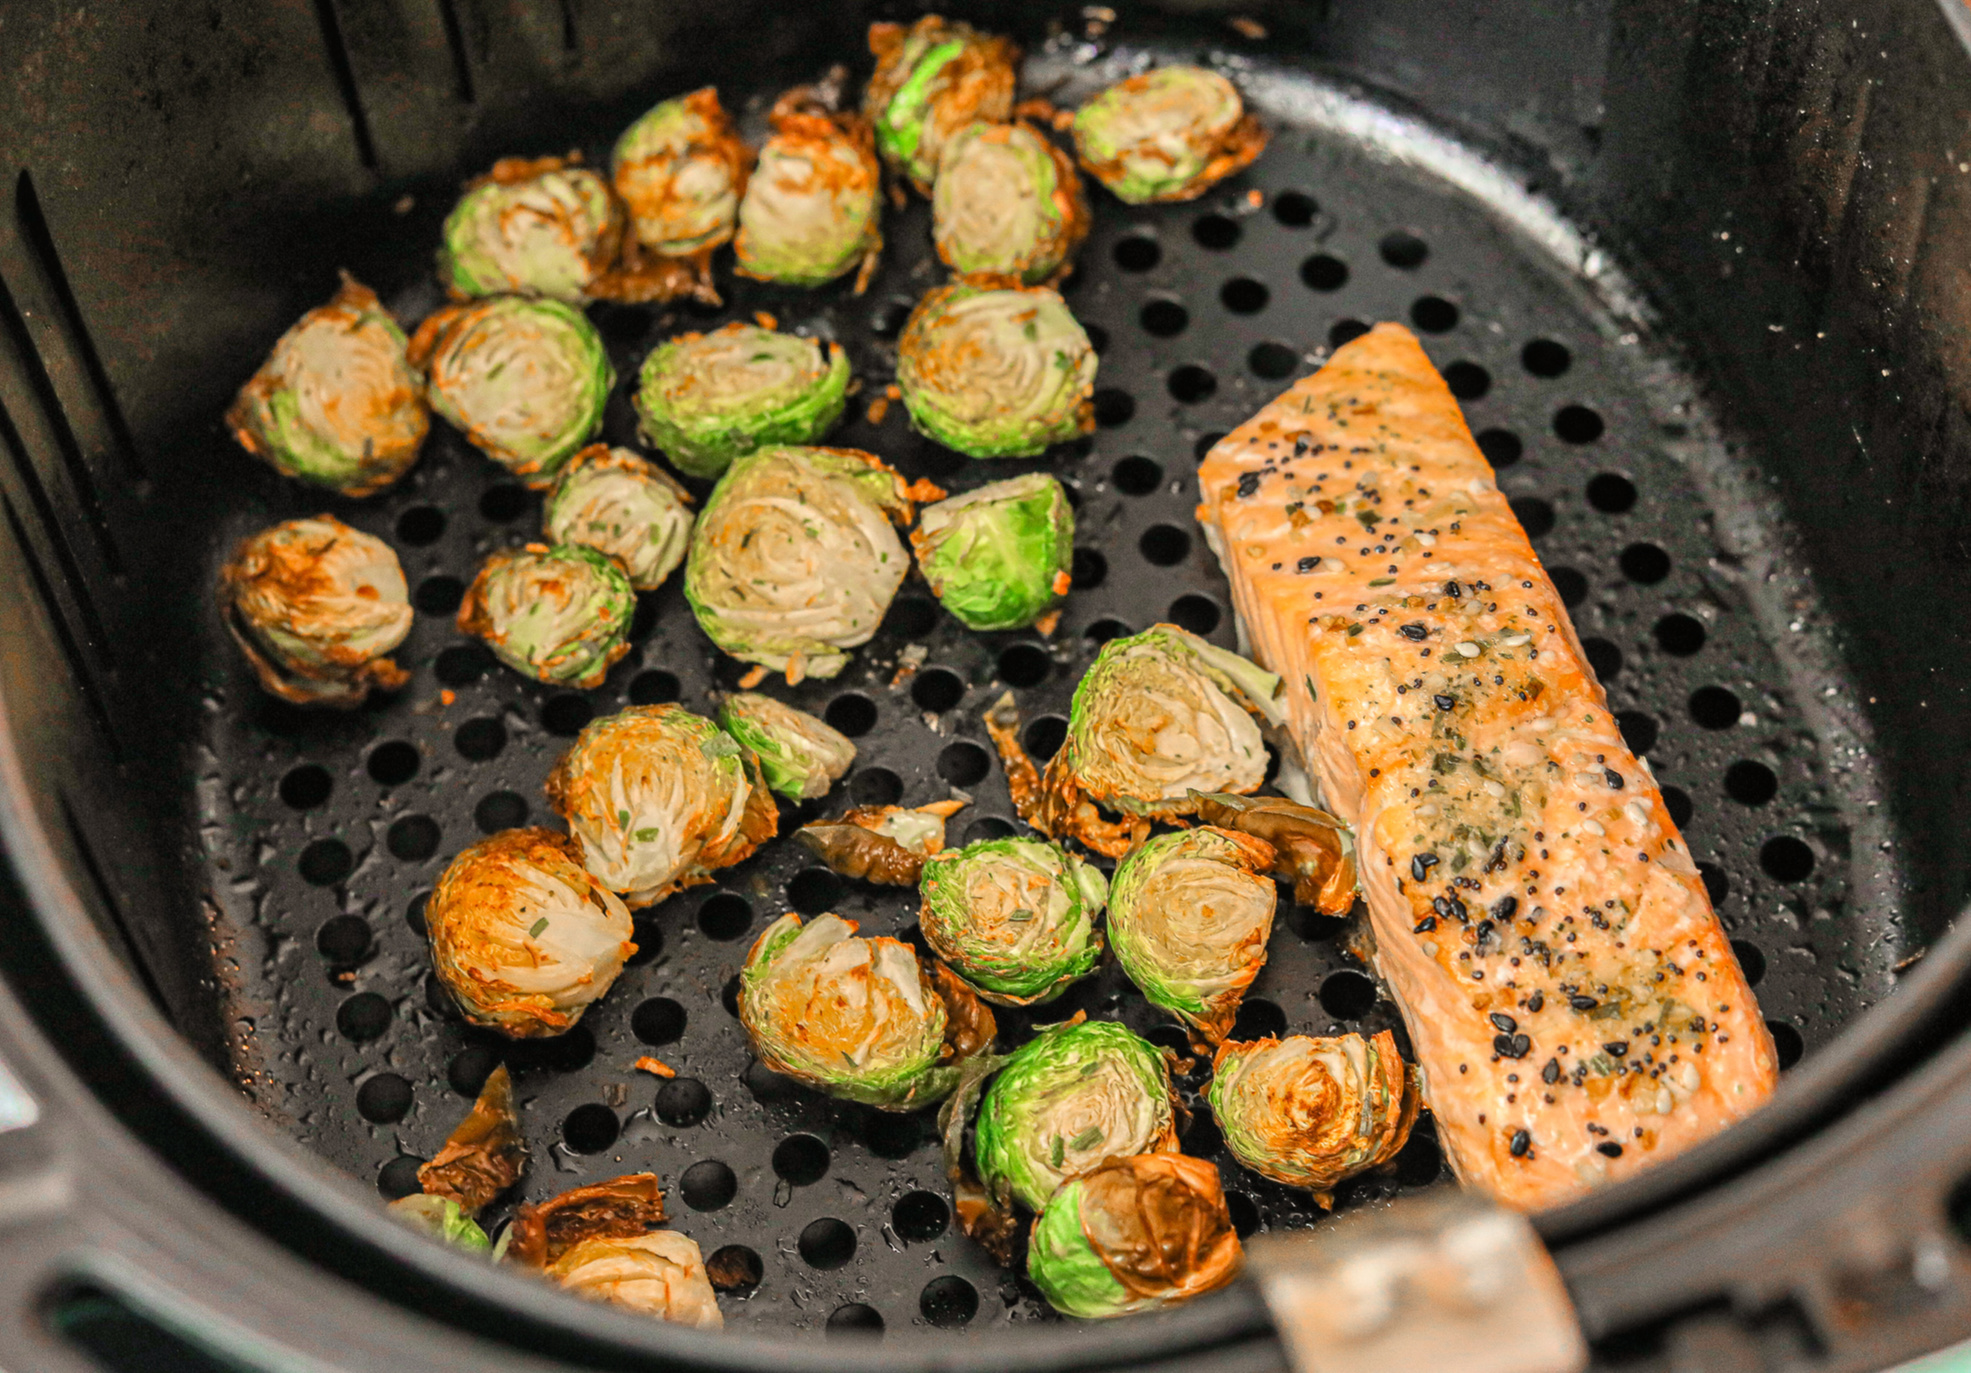 air fryer salmon, trader joes, Brussels sprouts, whole30, whole30 food, whole30 recipes, whole30 lunch, gluten free, dairy free, Brussels sprouts crispy, air fried, air fryer, eat better, Whole Foods, grain free, low carb